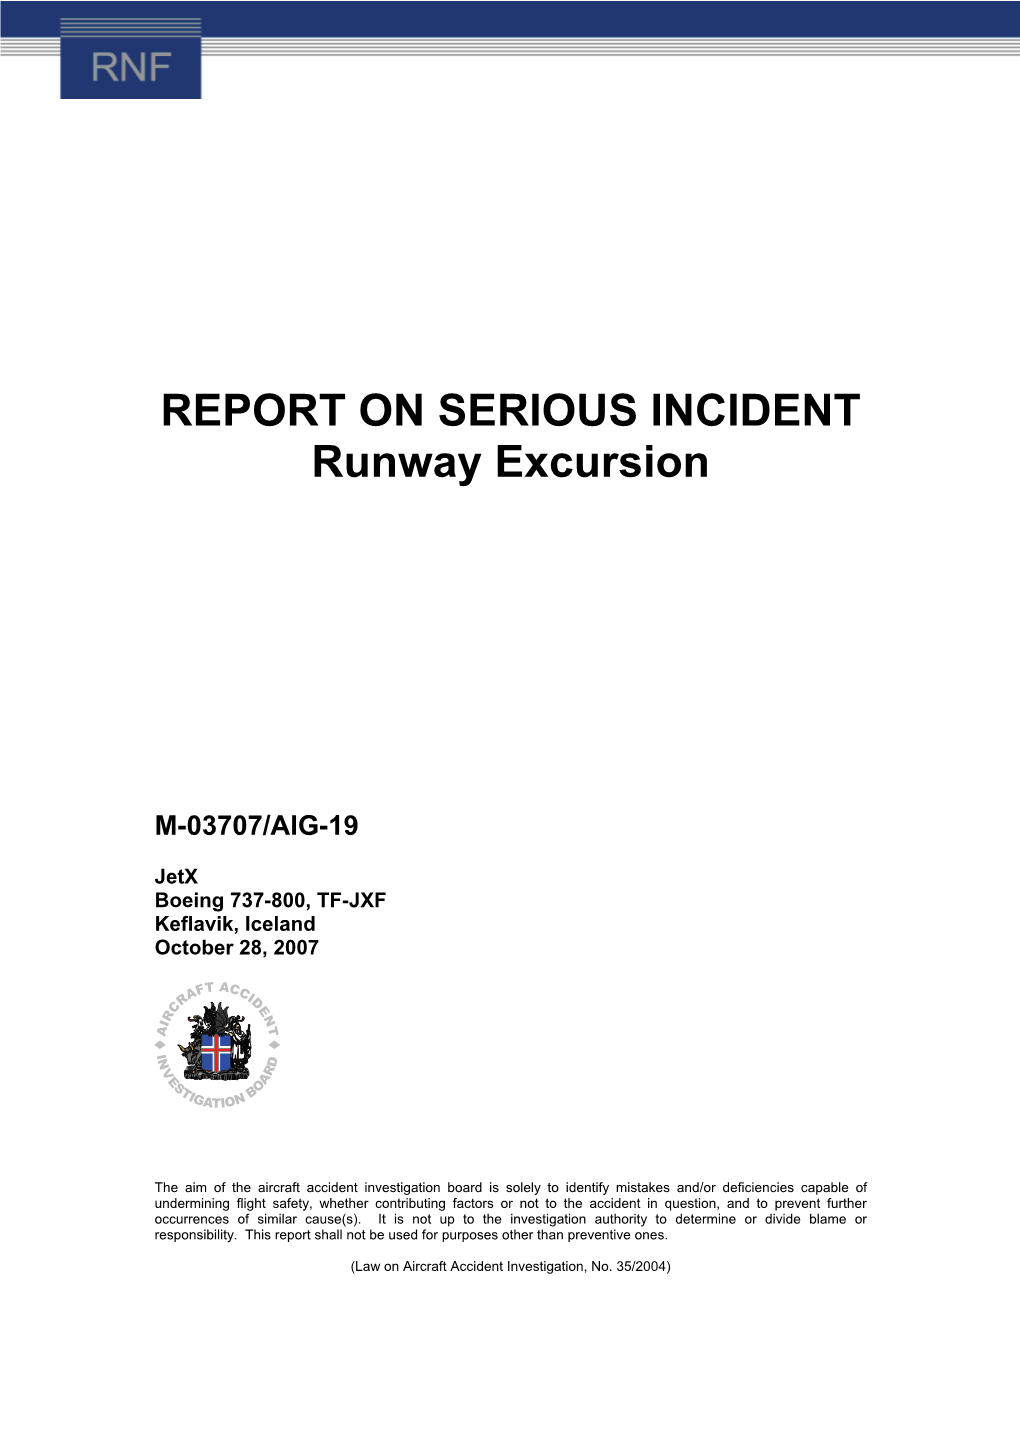 REPORT on SERIOUS INCIDENT Runway Excursion